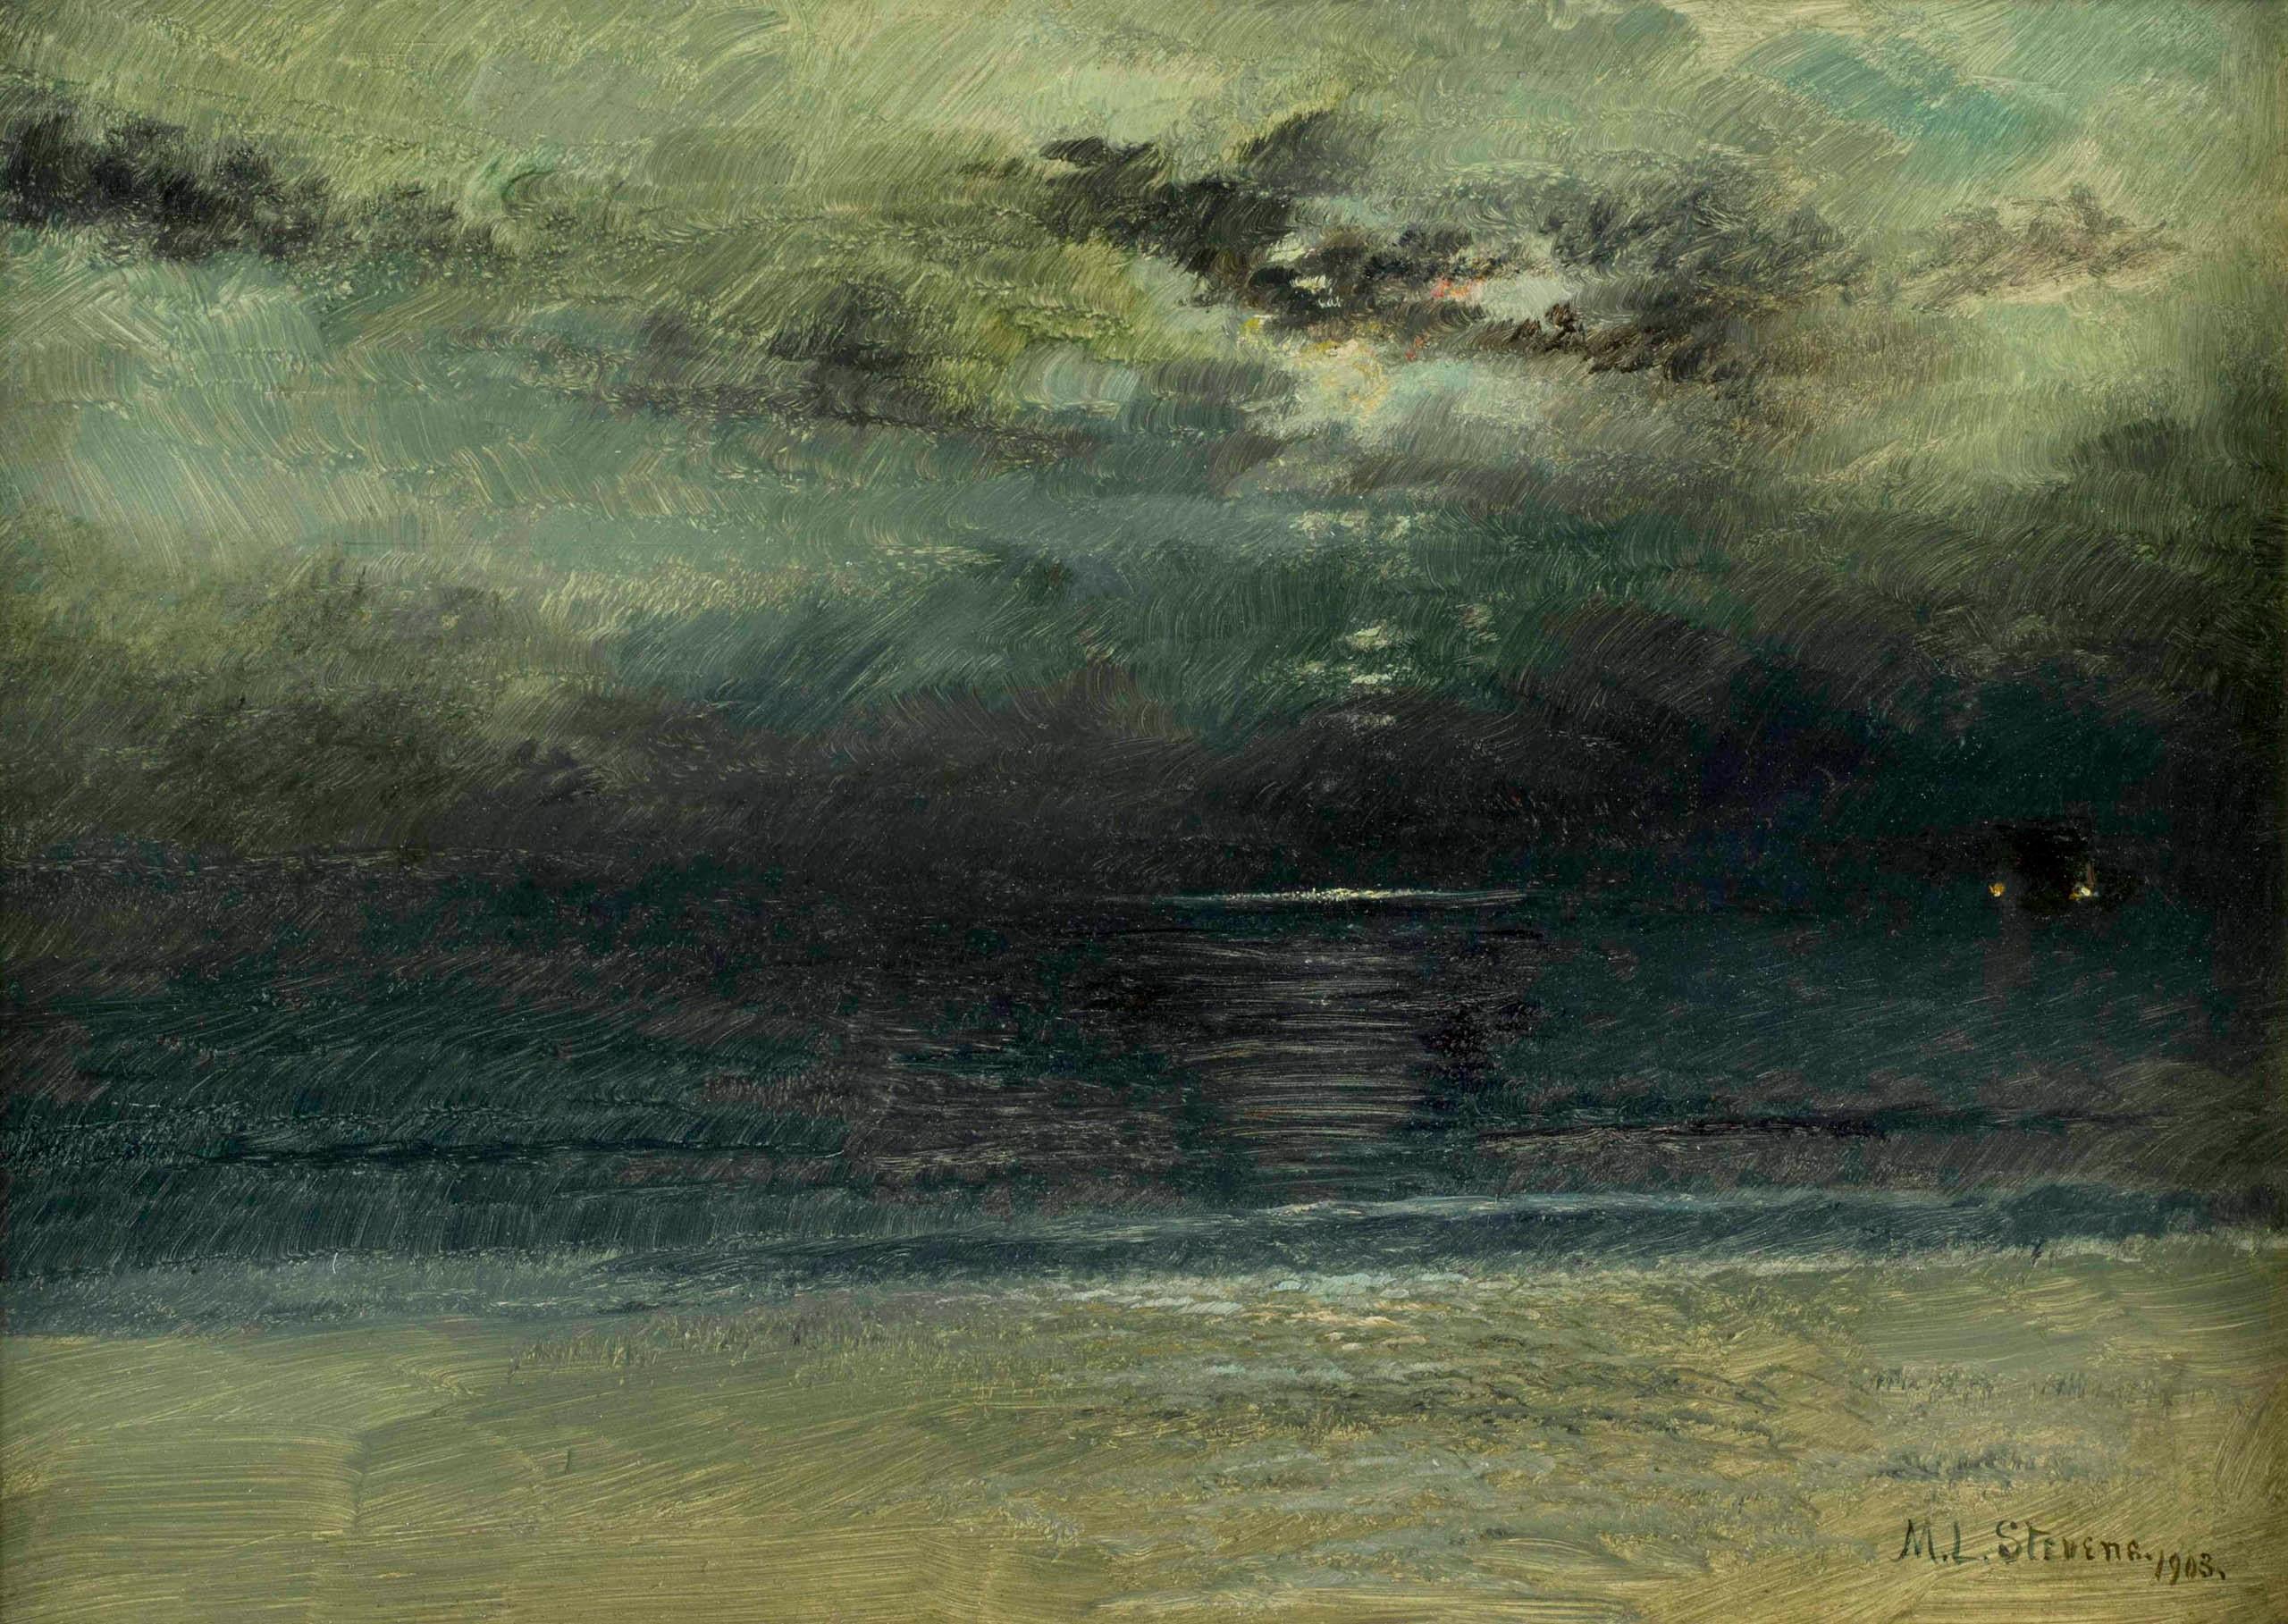 coastal scene at dusk, seascape painting by American artist Mary Lord Stevens

Mary Lord Stevens (1833-1920)
Dusk at Sea
Oil on paper mounted to board
10 x 14 inches
Signed and dated 1903, lower right

Mary Lord Stevens was born in Batavia, New York